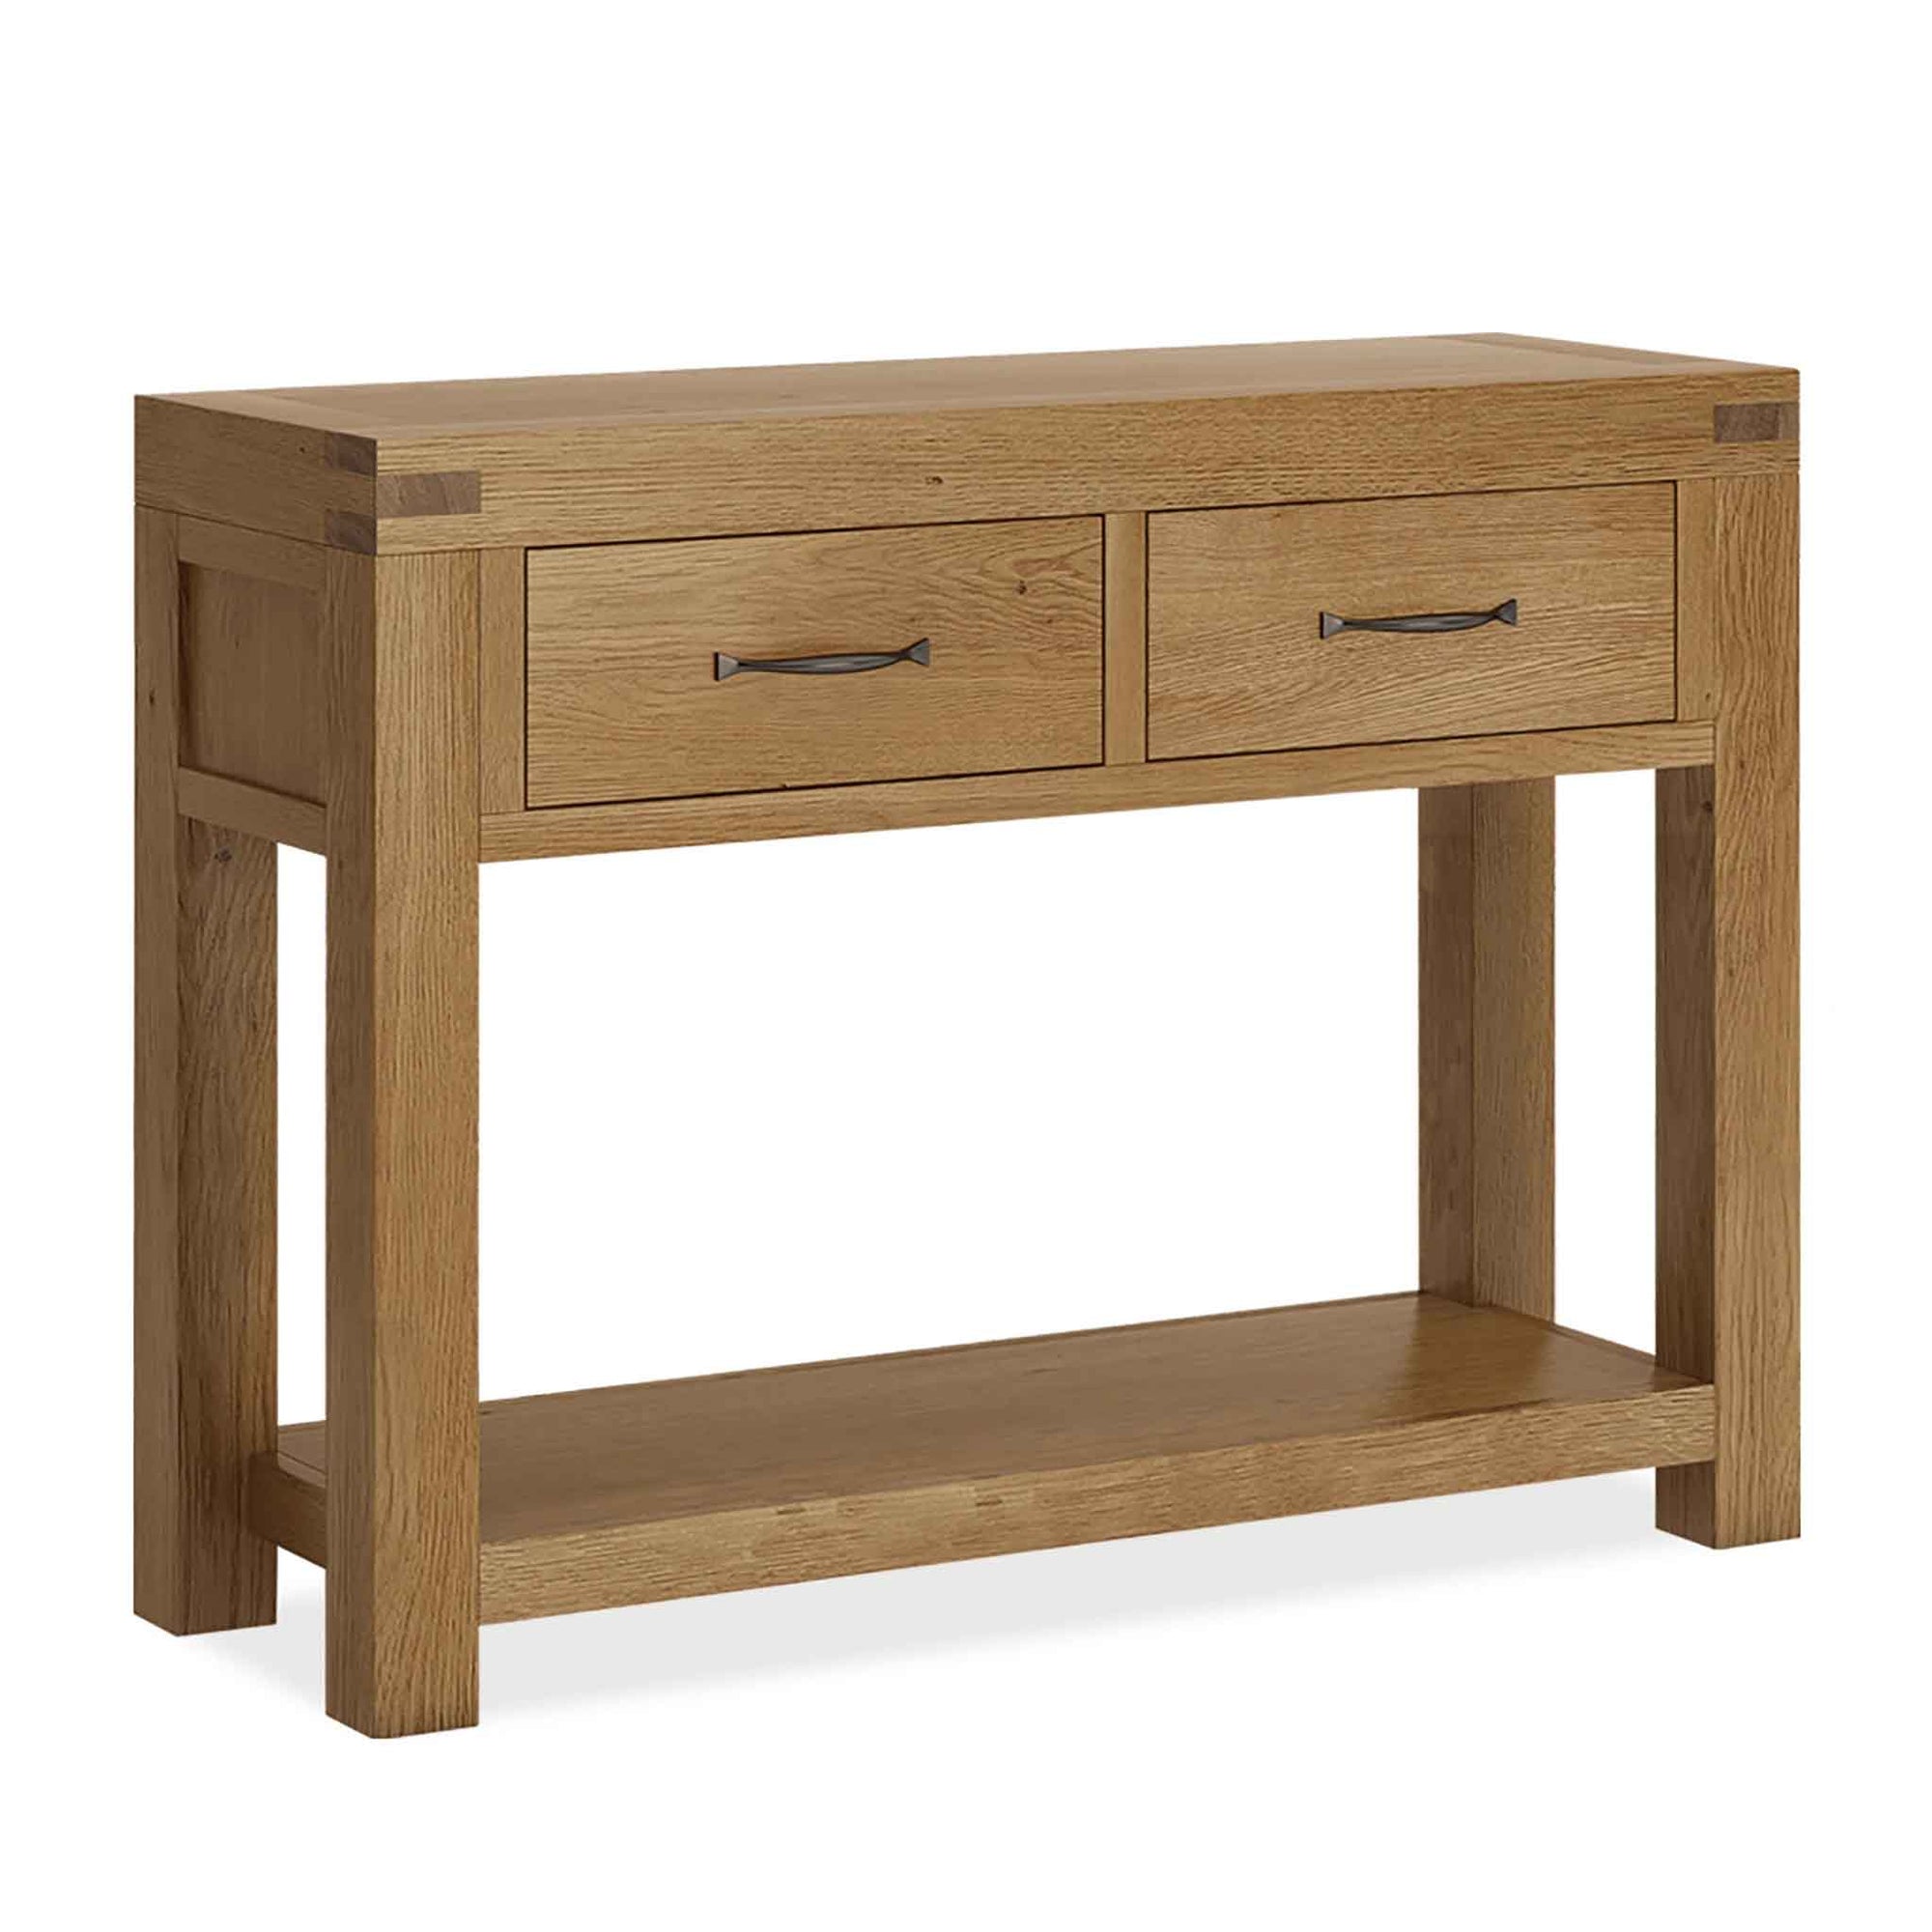 Abbey Grande Large Oak Console Table With Drawers